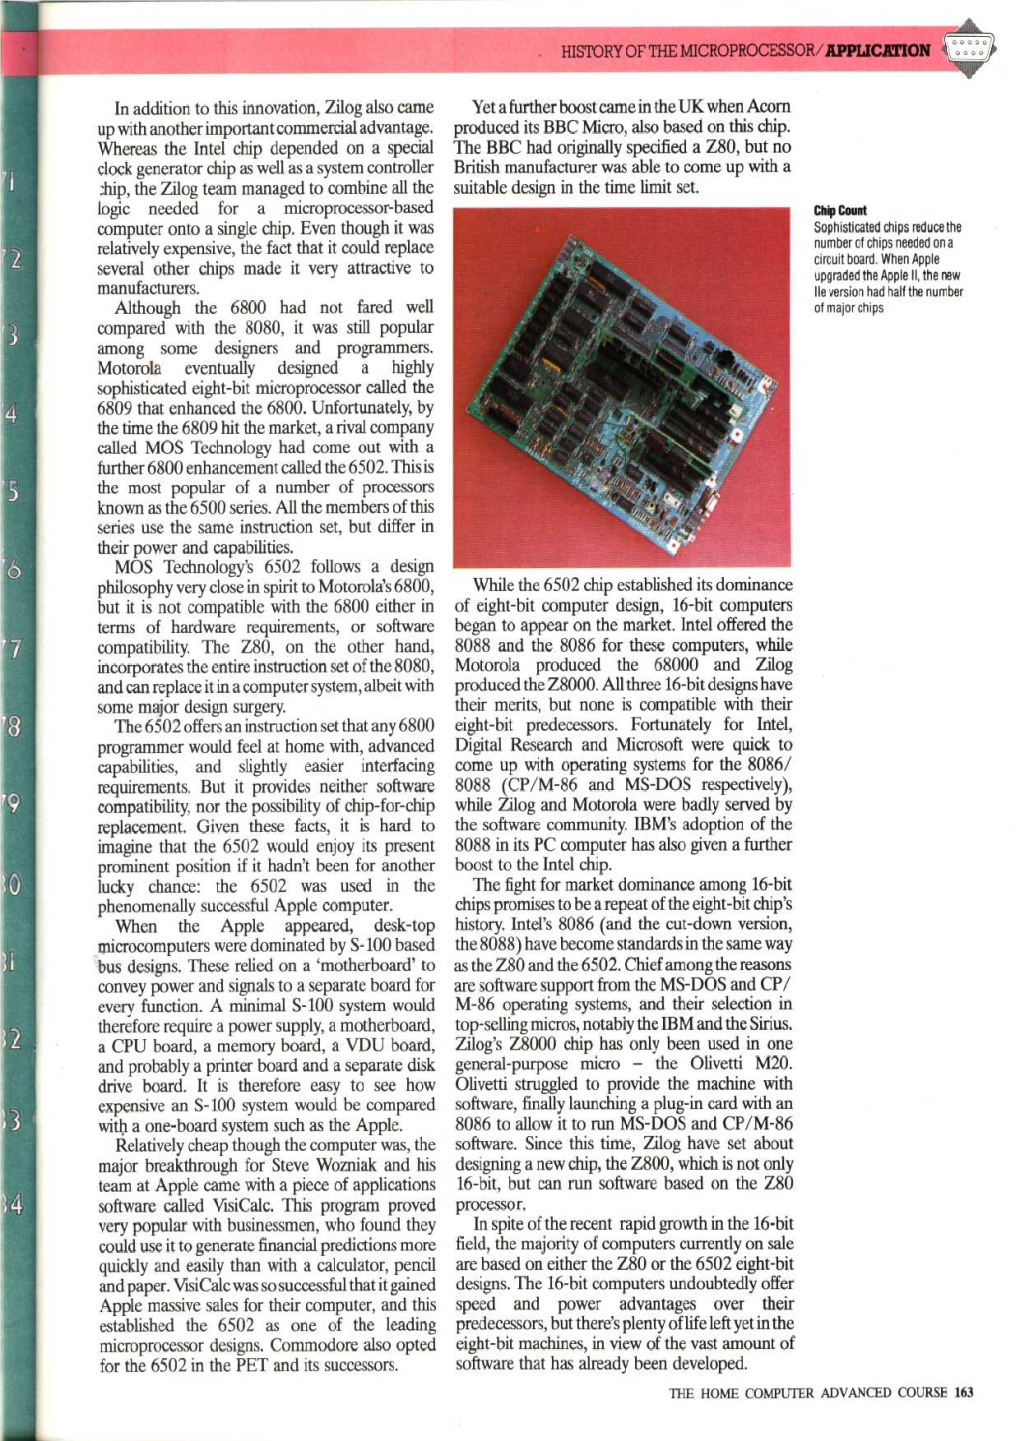 In Addition to This Innovation, Zilog Also Came up with Another